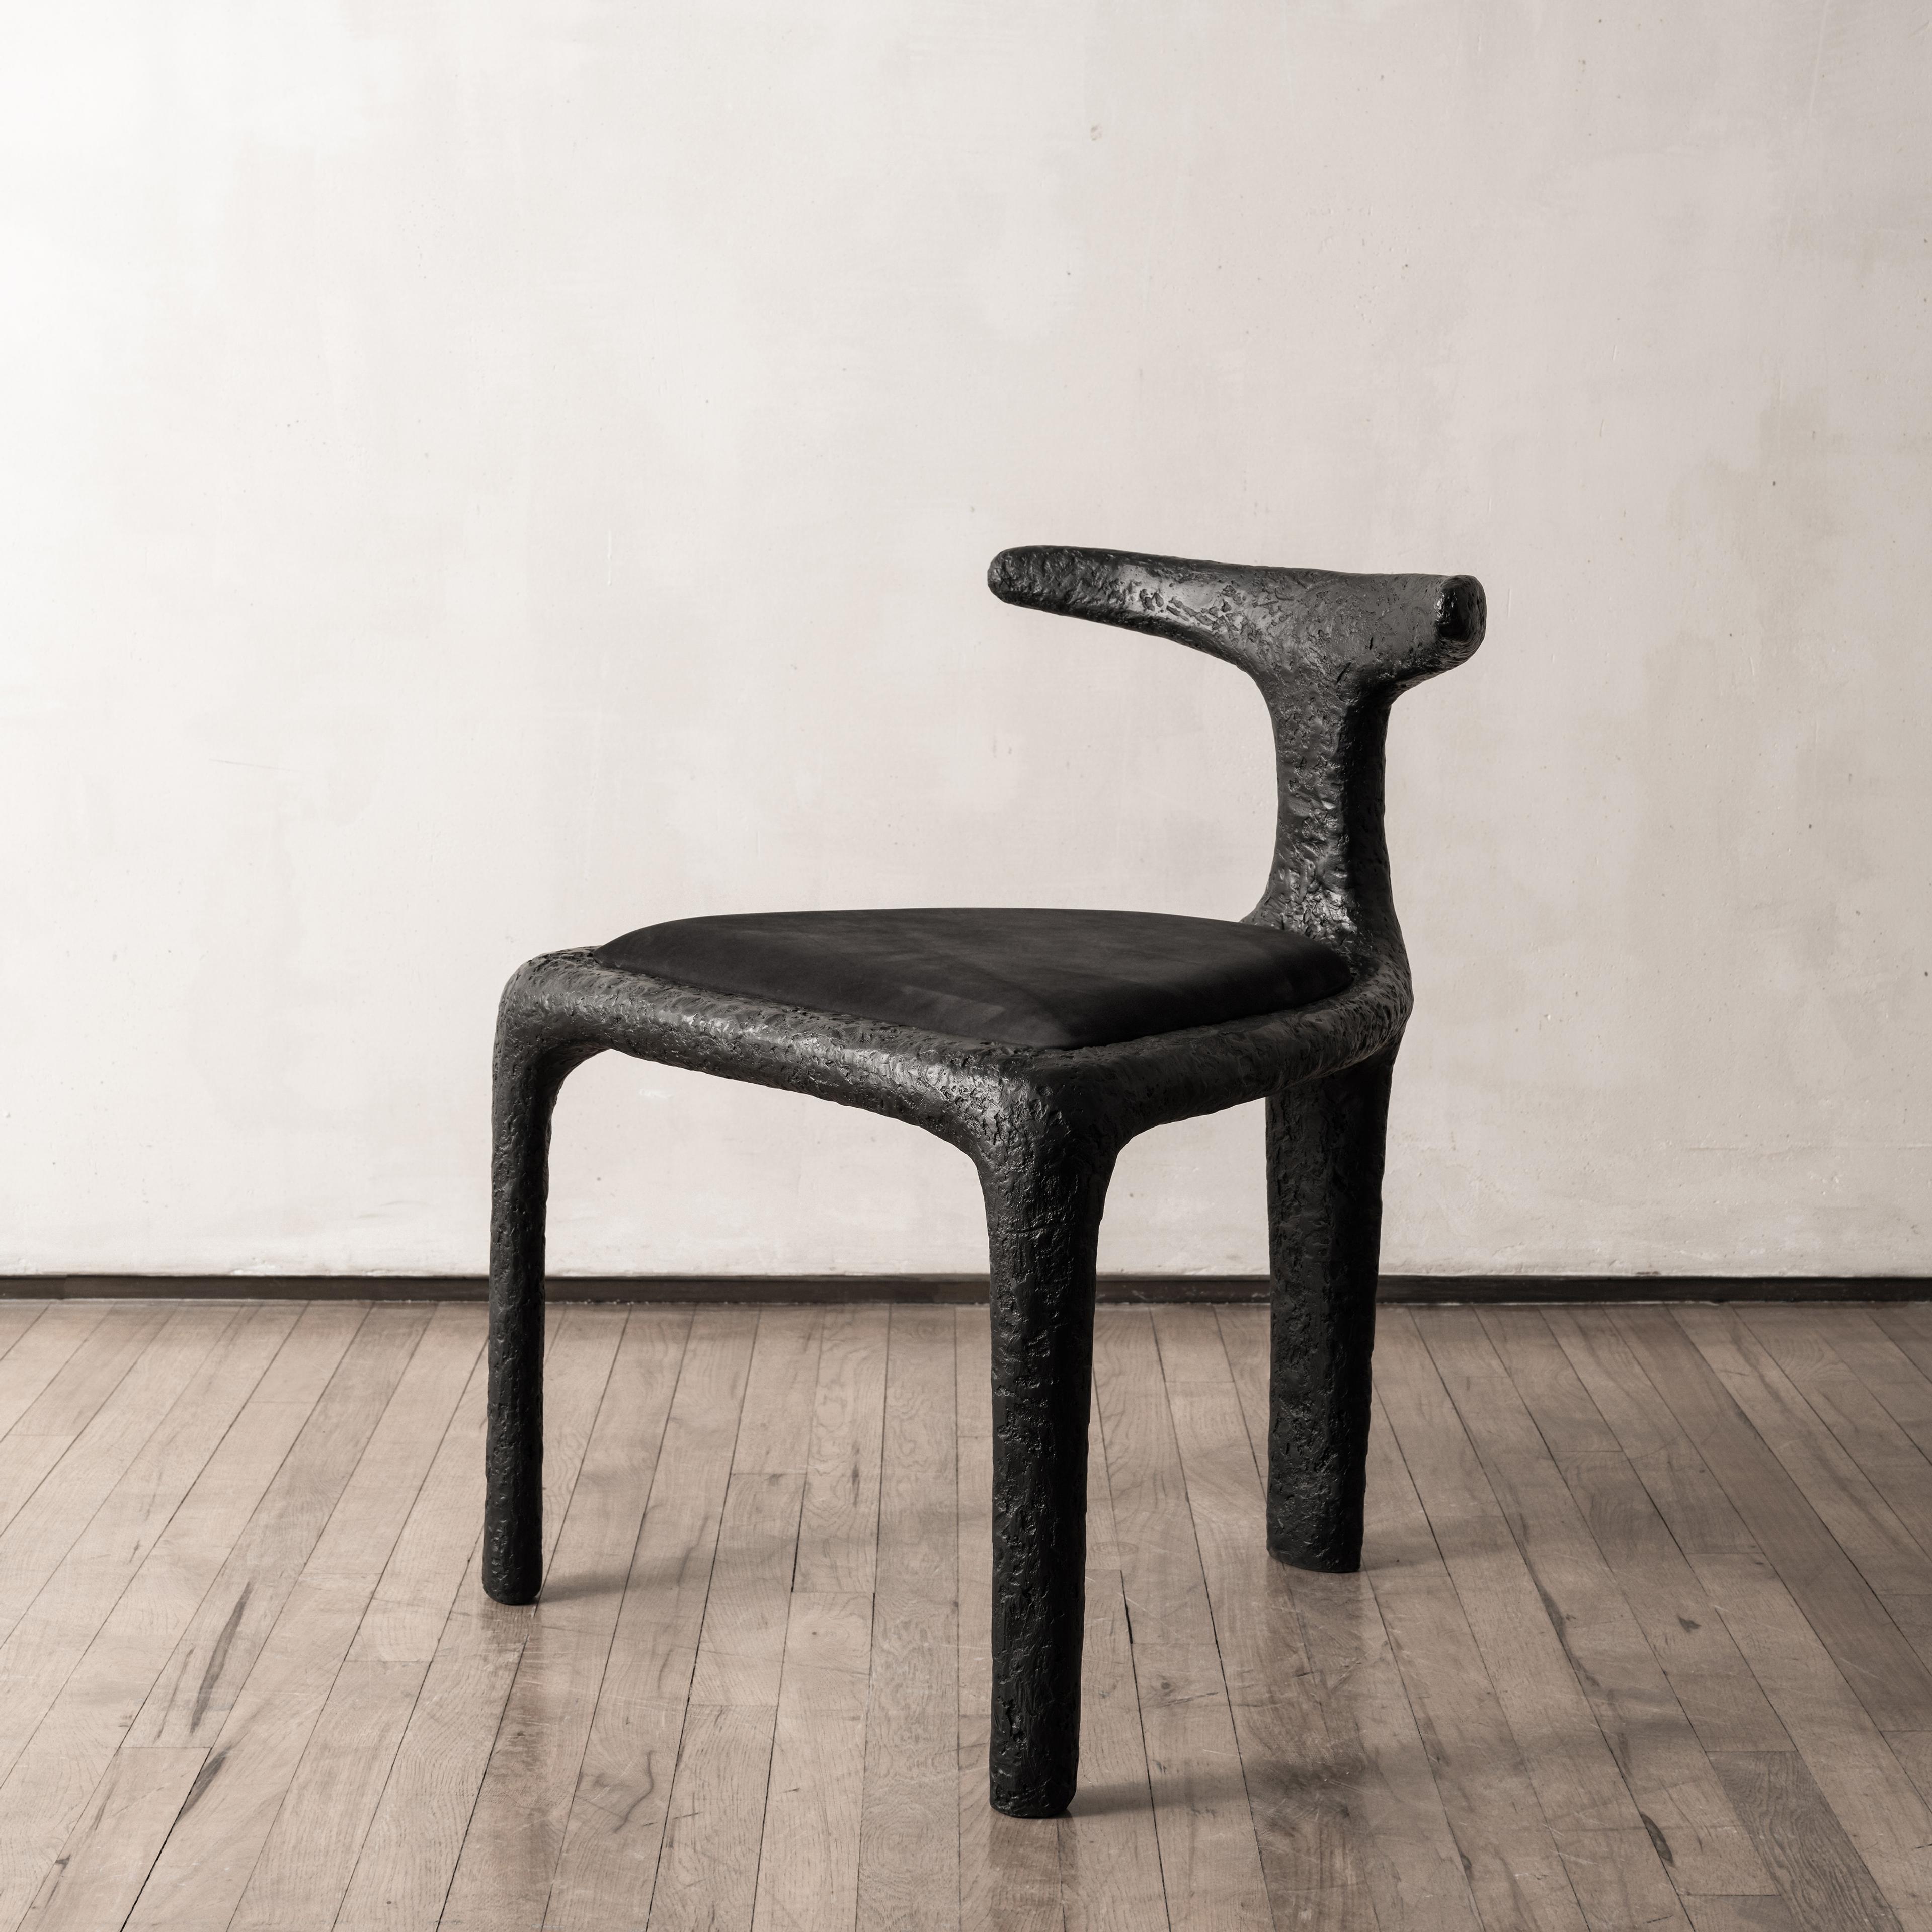 Ateliers Courbet | Triad Chair by Pieter Maes